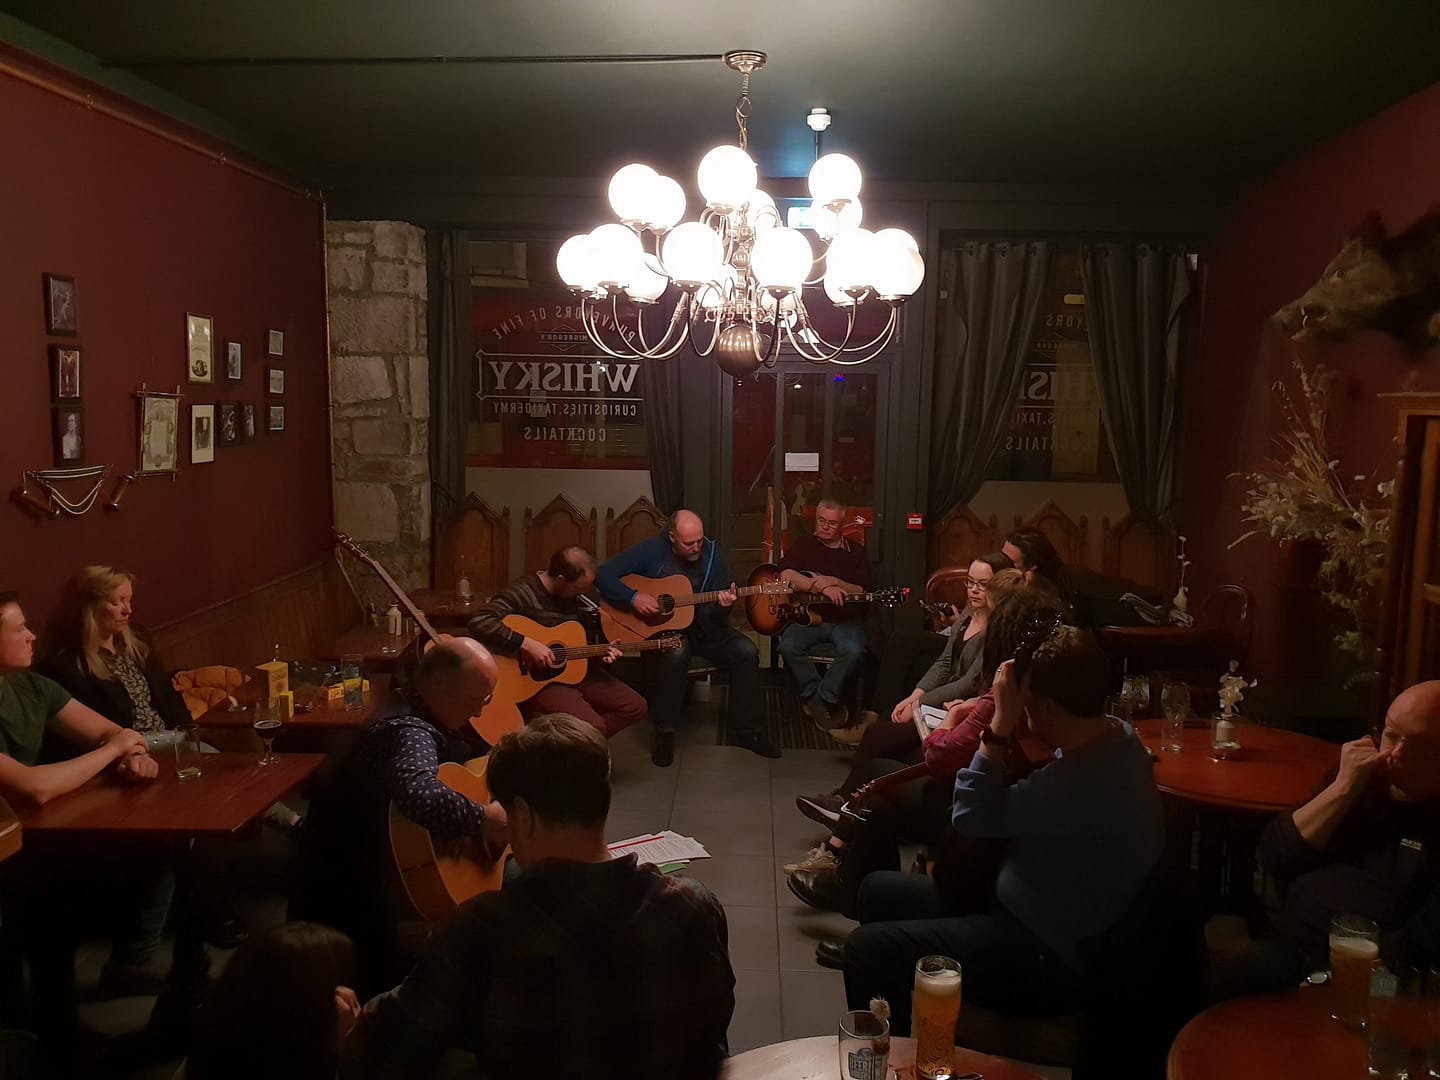 20181113 215533 - A look at the Songwriters Circle